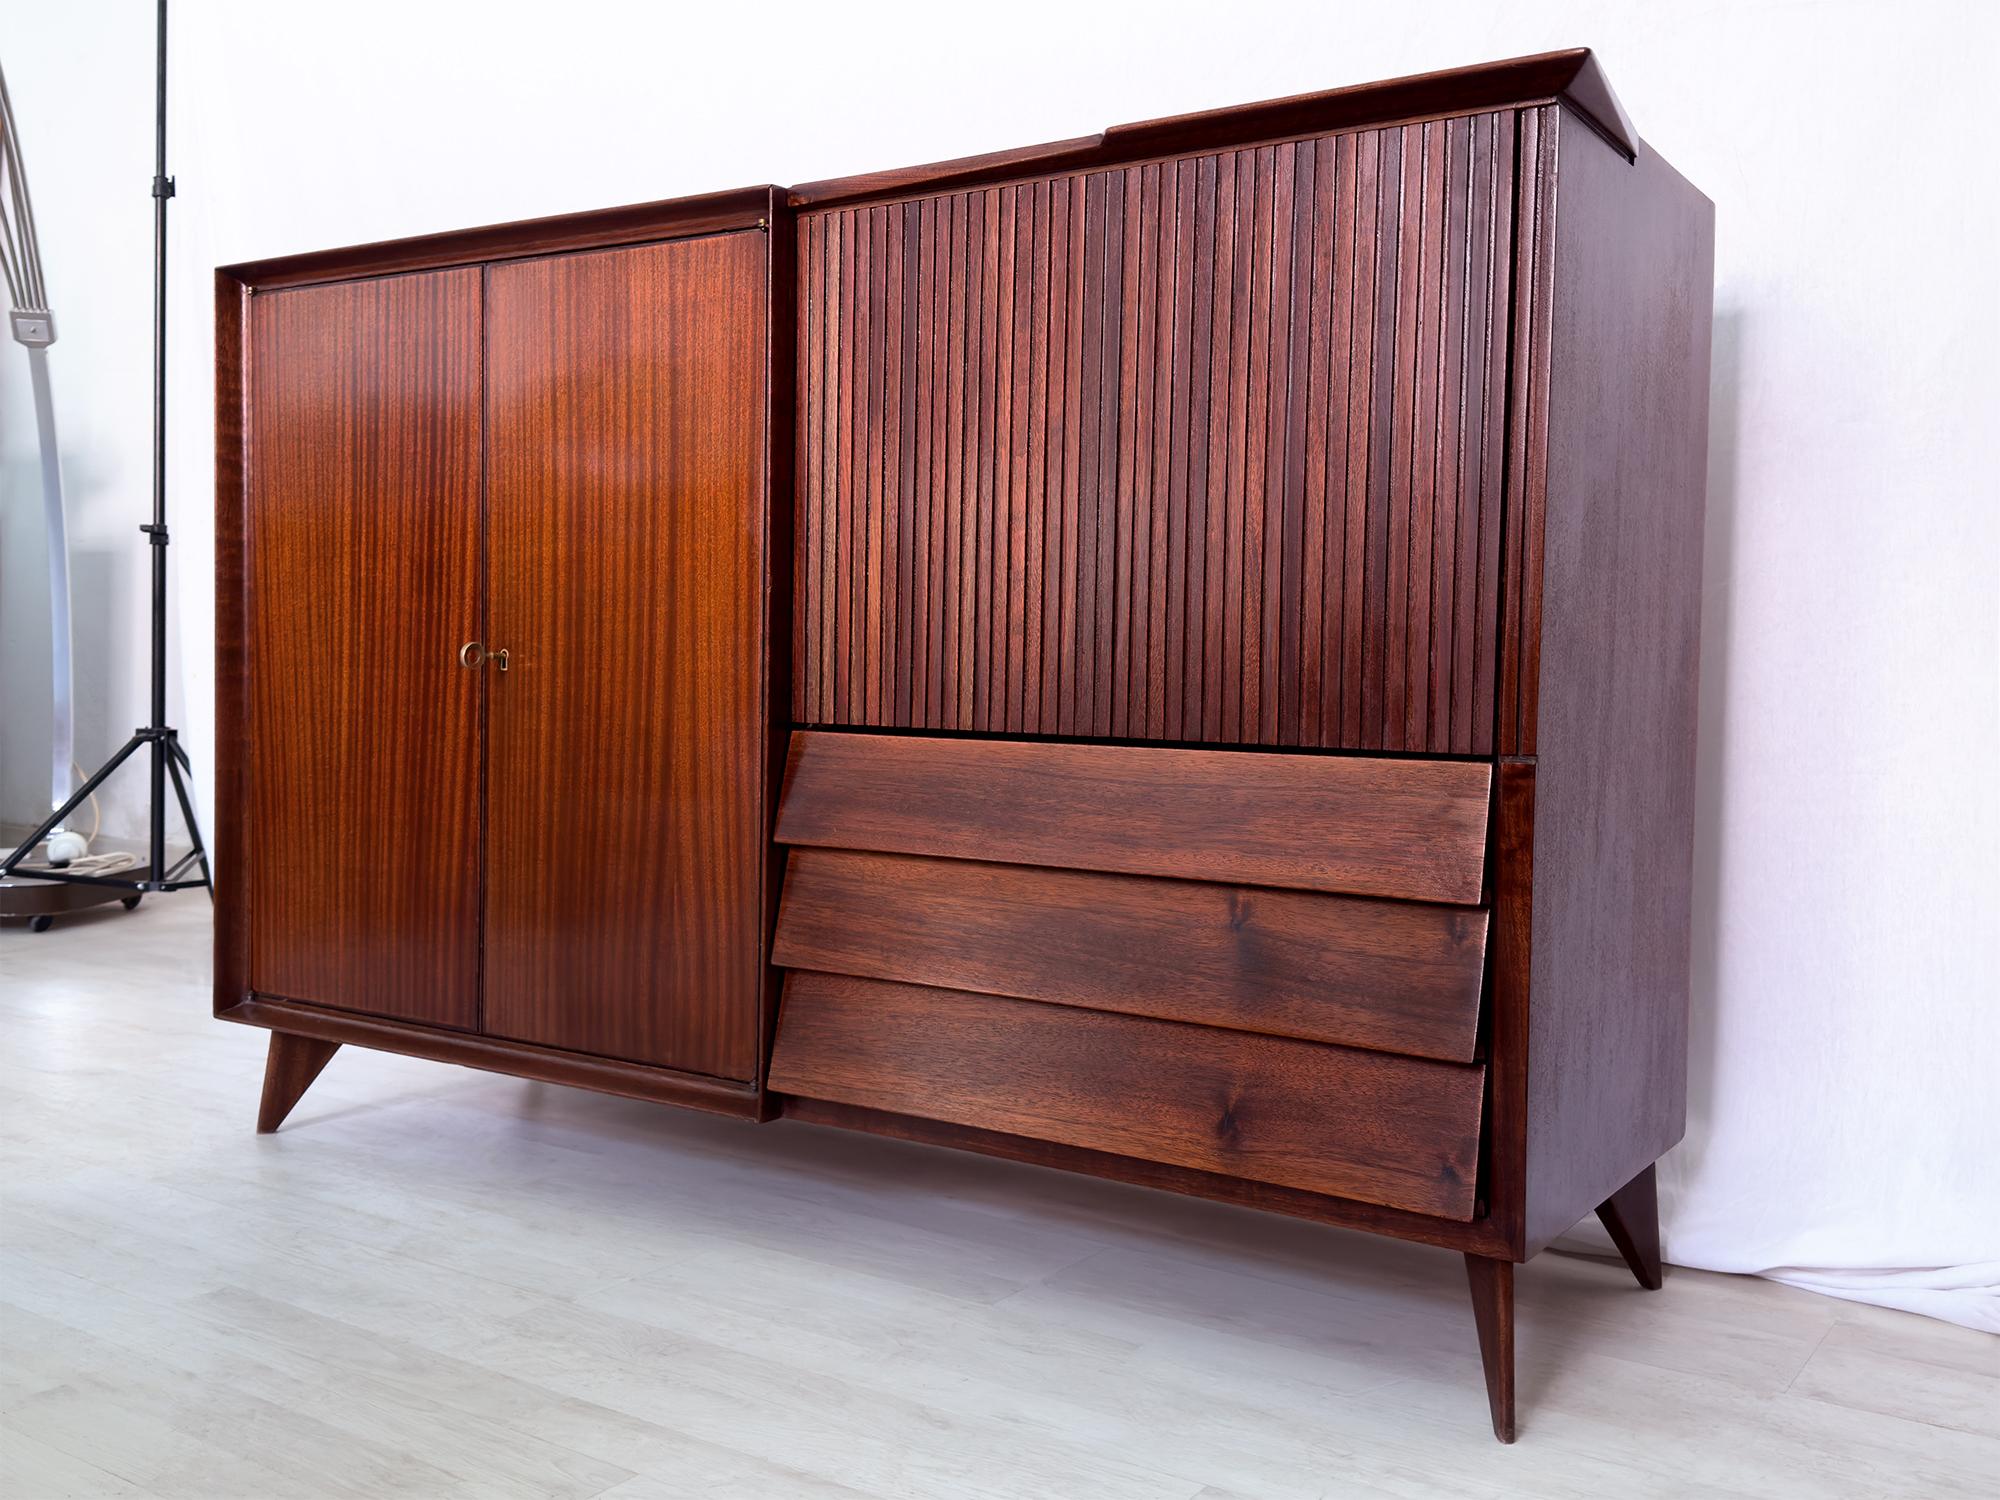 Stunning original Sideboard of the 1950s, attributable to the design of Vittorio Dassi, and crafted with a gorgeous material like as warm teakwood.

On left side two doors hidden a compartment with internal glass shelf, offering plenty of room for